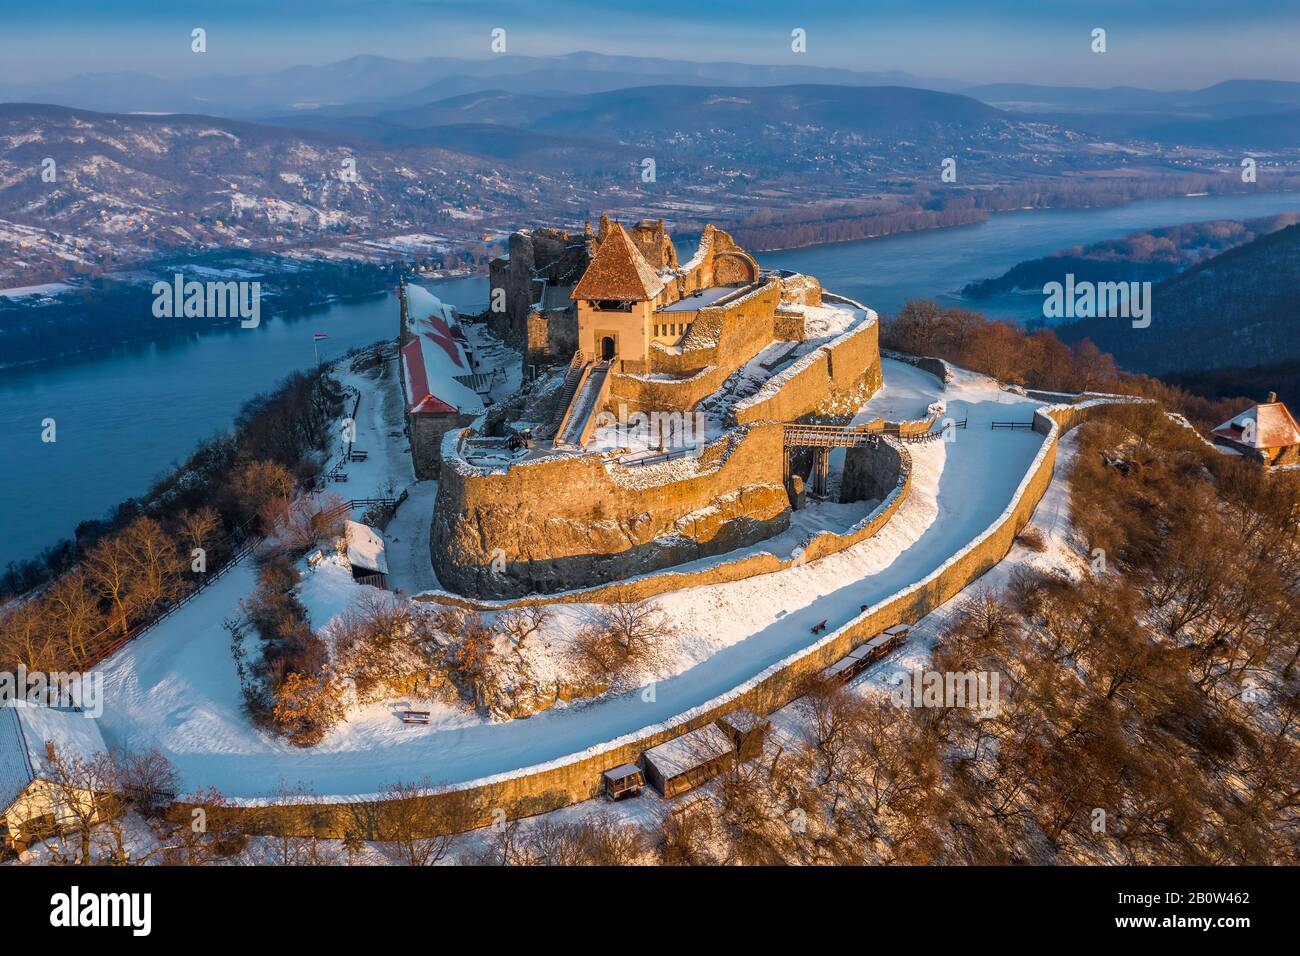 Visegrad, Hungary - Aerial view of the beautiful snowy high castle of Visegrad at sunrise with Dunakanyar at background on a winter morning Stock Photo